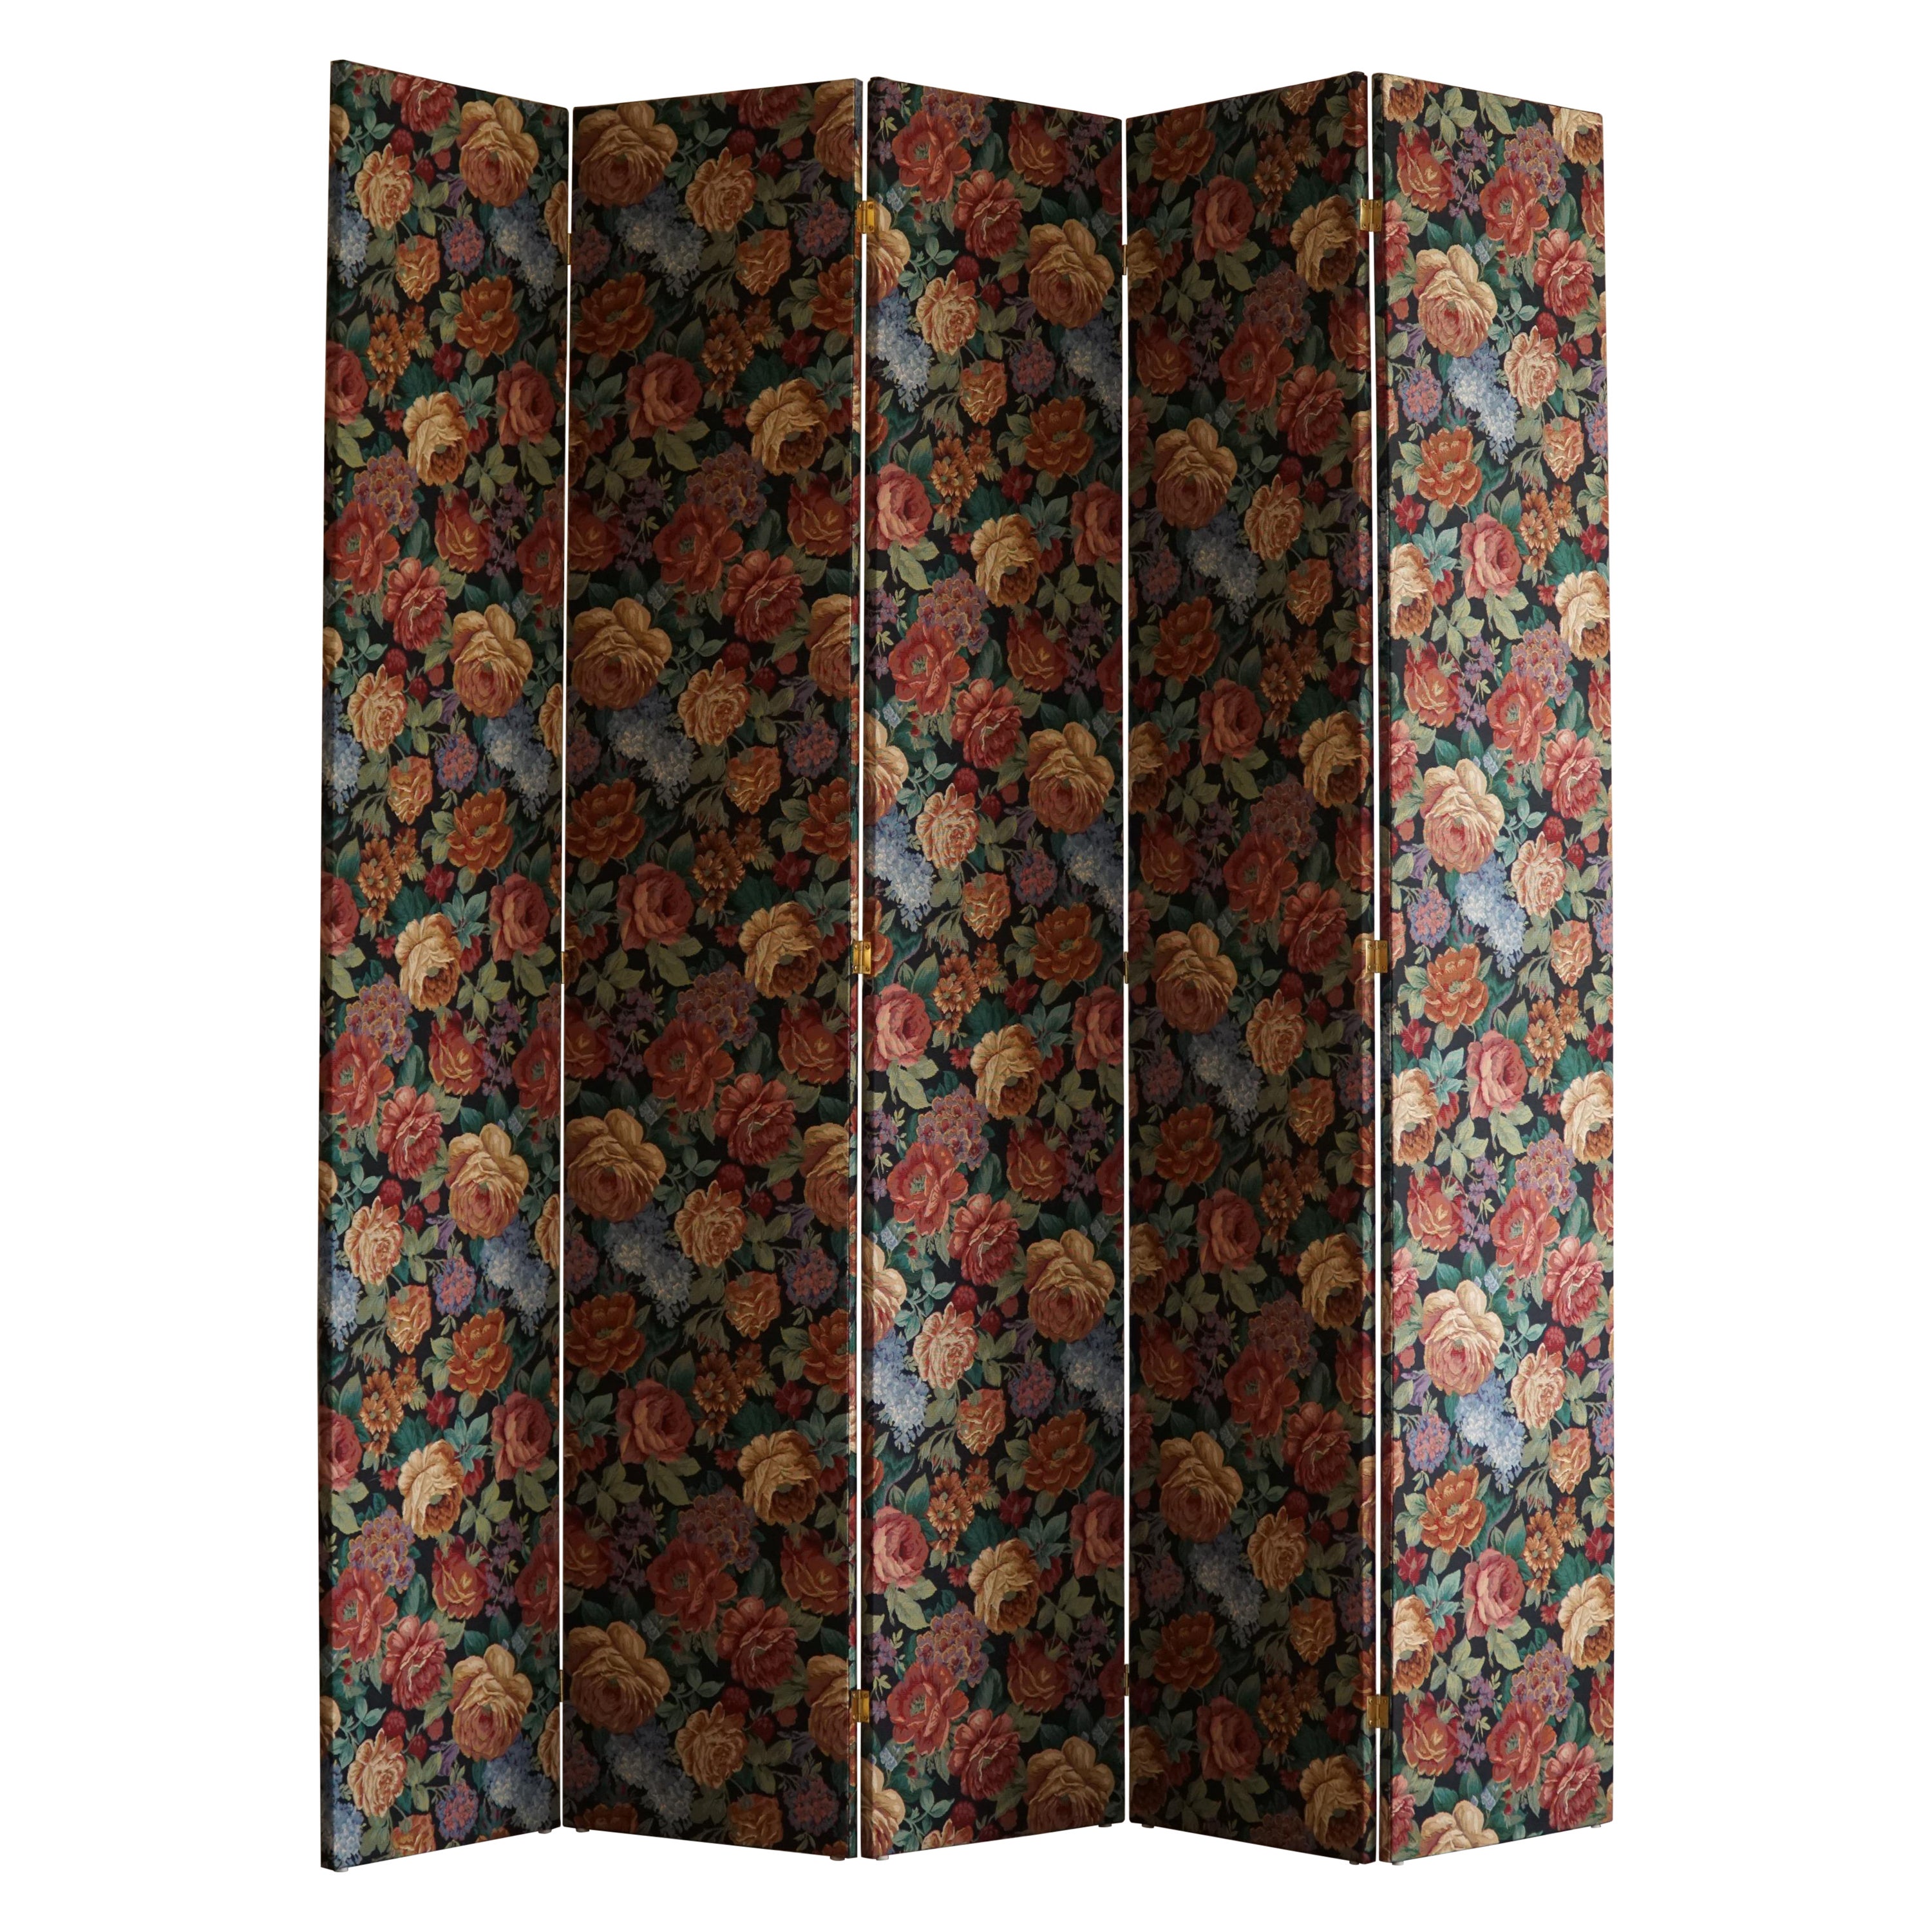 "Roomie" a Room Divider by eliaselias in Vintage Fabric, Danish Design, 2023